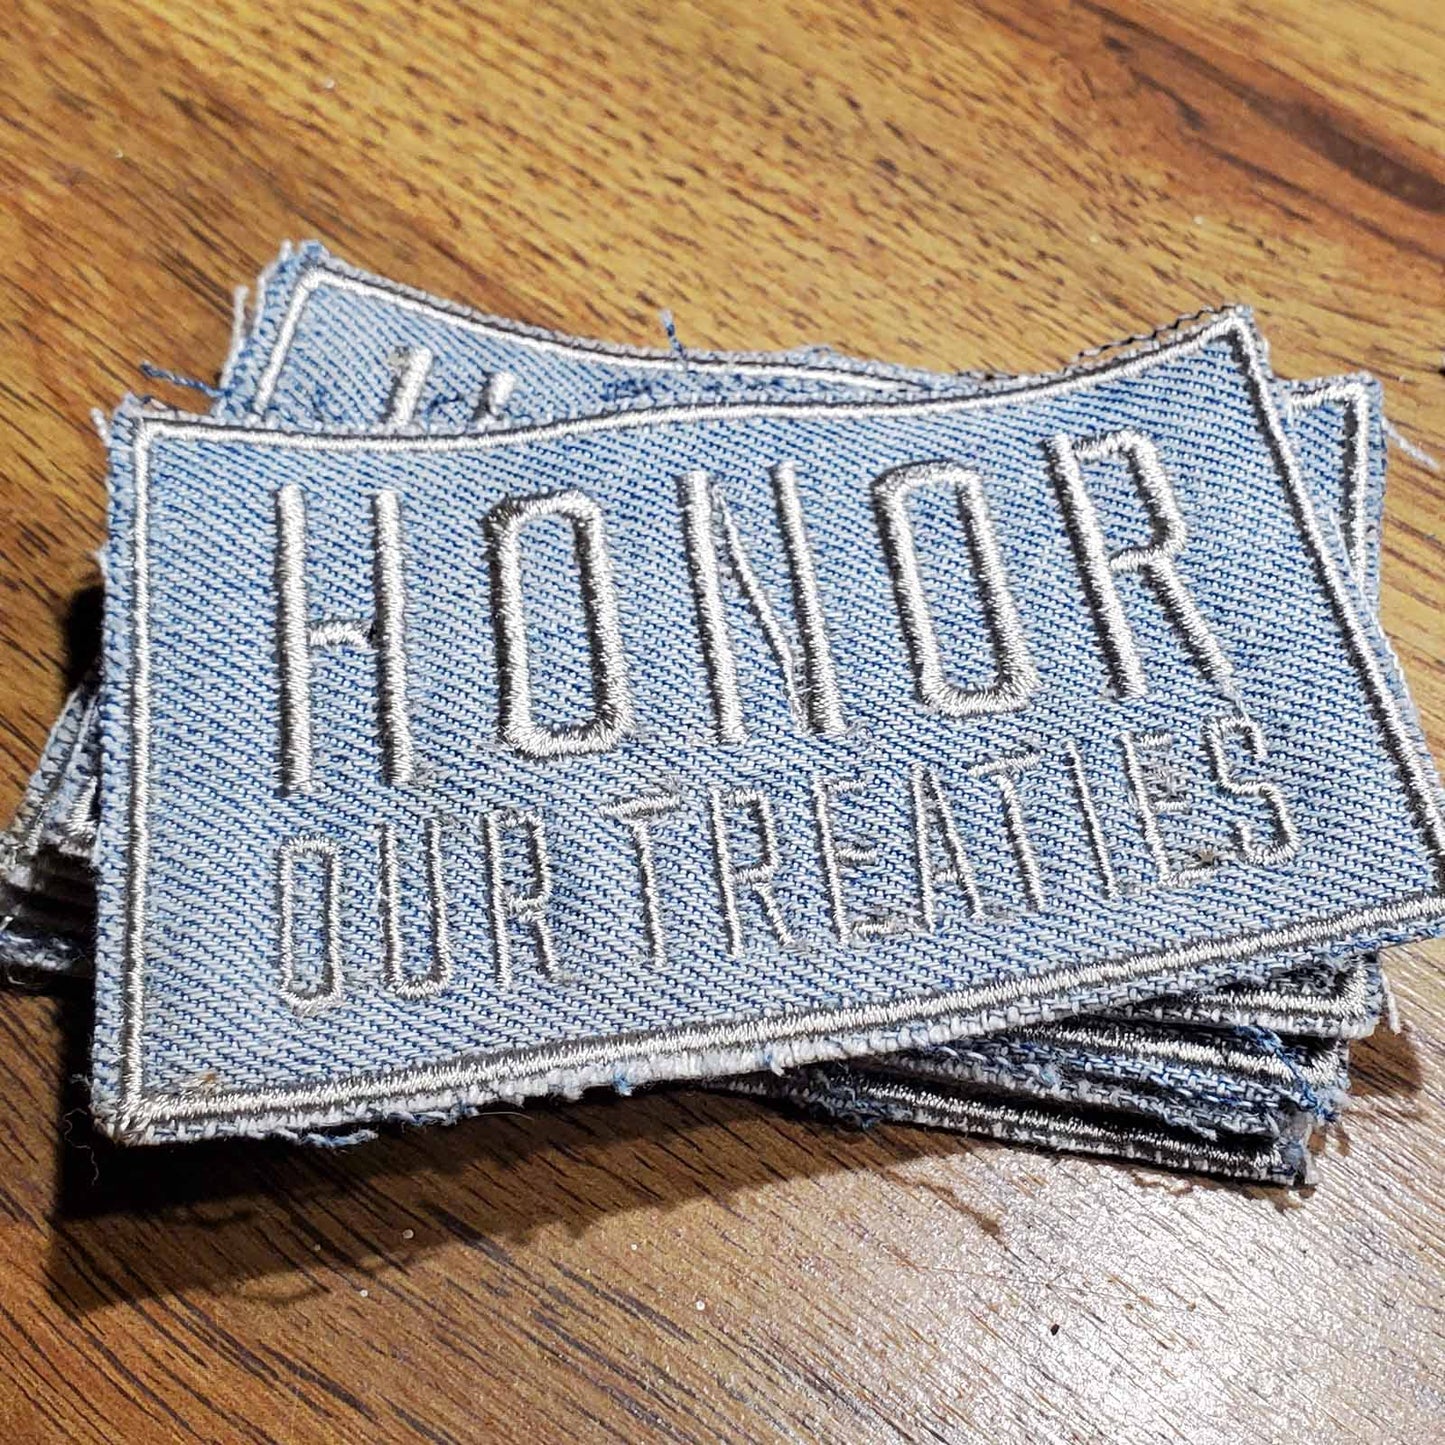 Honor Our Treaties Upcycled Patch